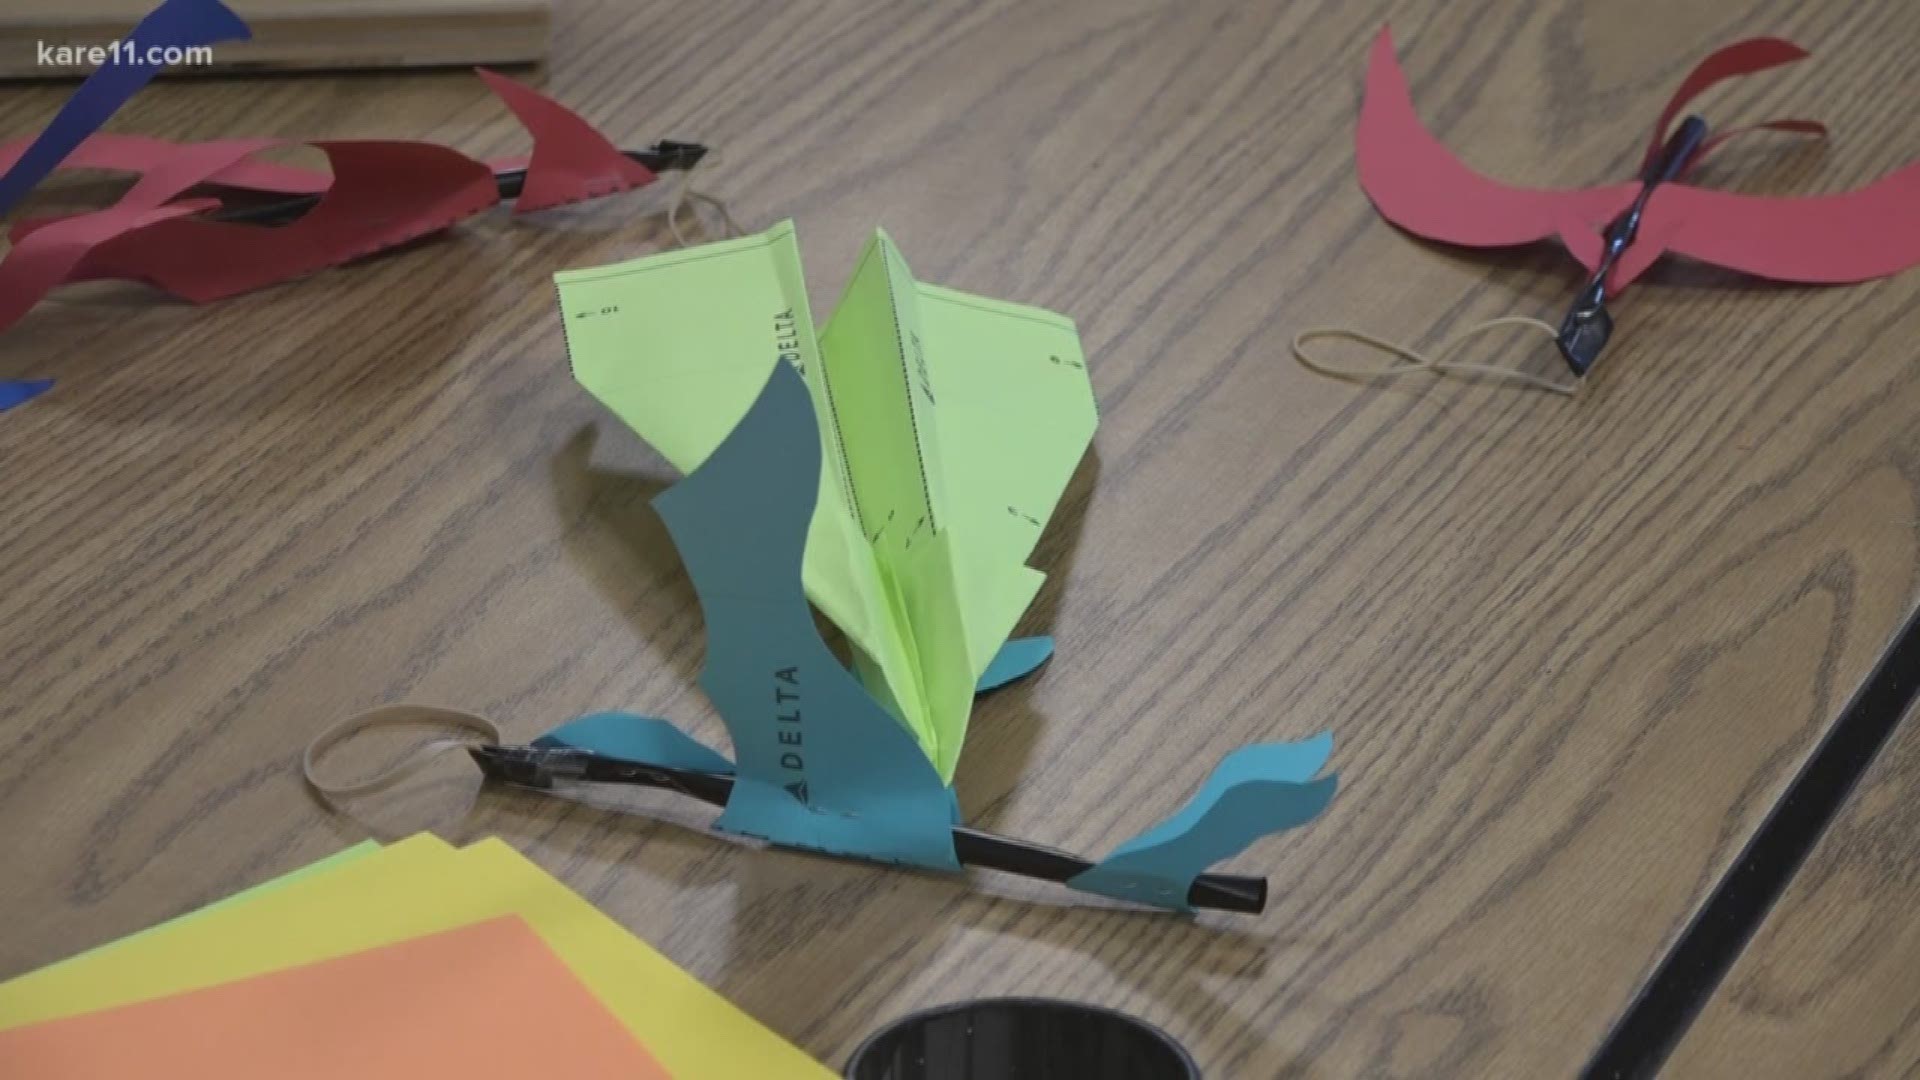 The Science Museum of Minnesota is the place to be on Saturday, as it hosts its first-ever Paper Airplane Day.